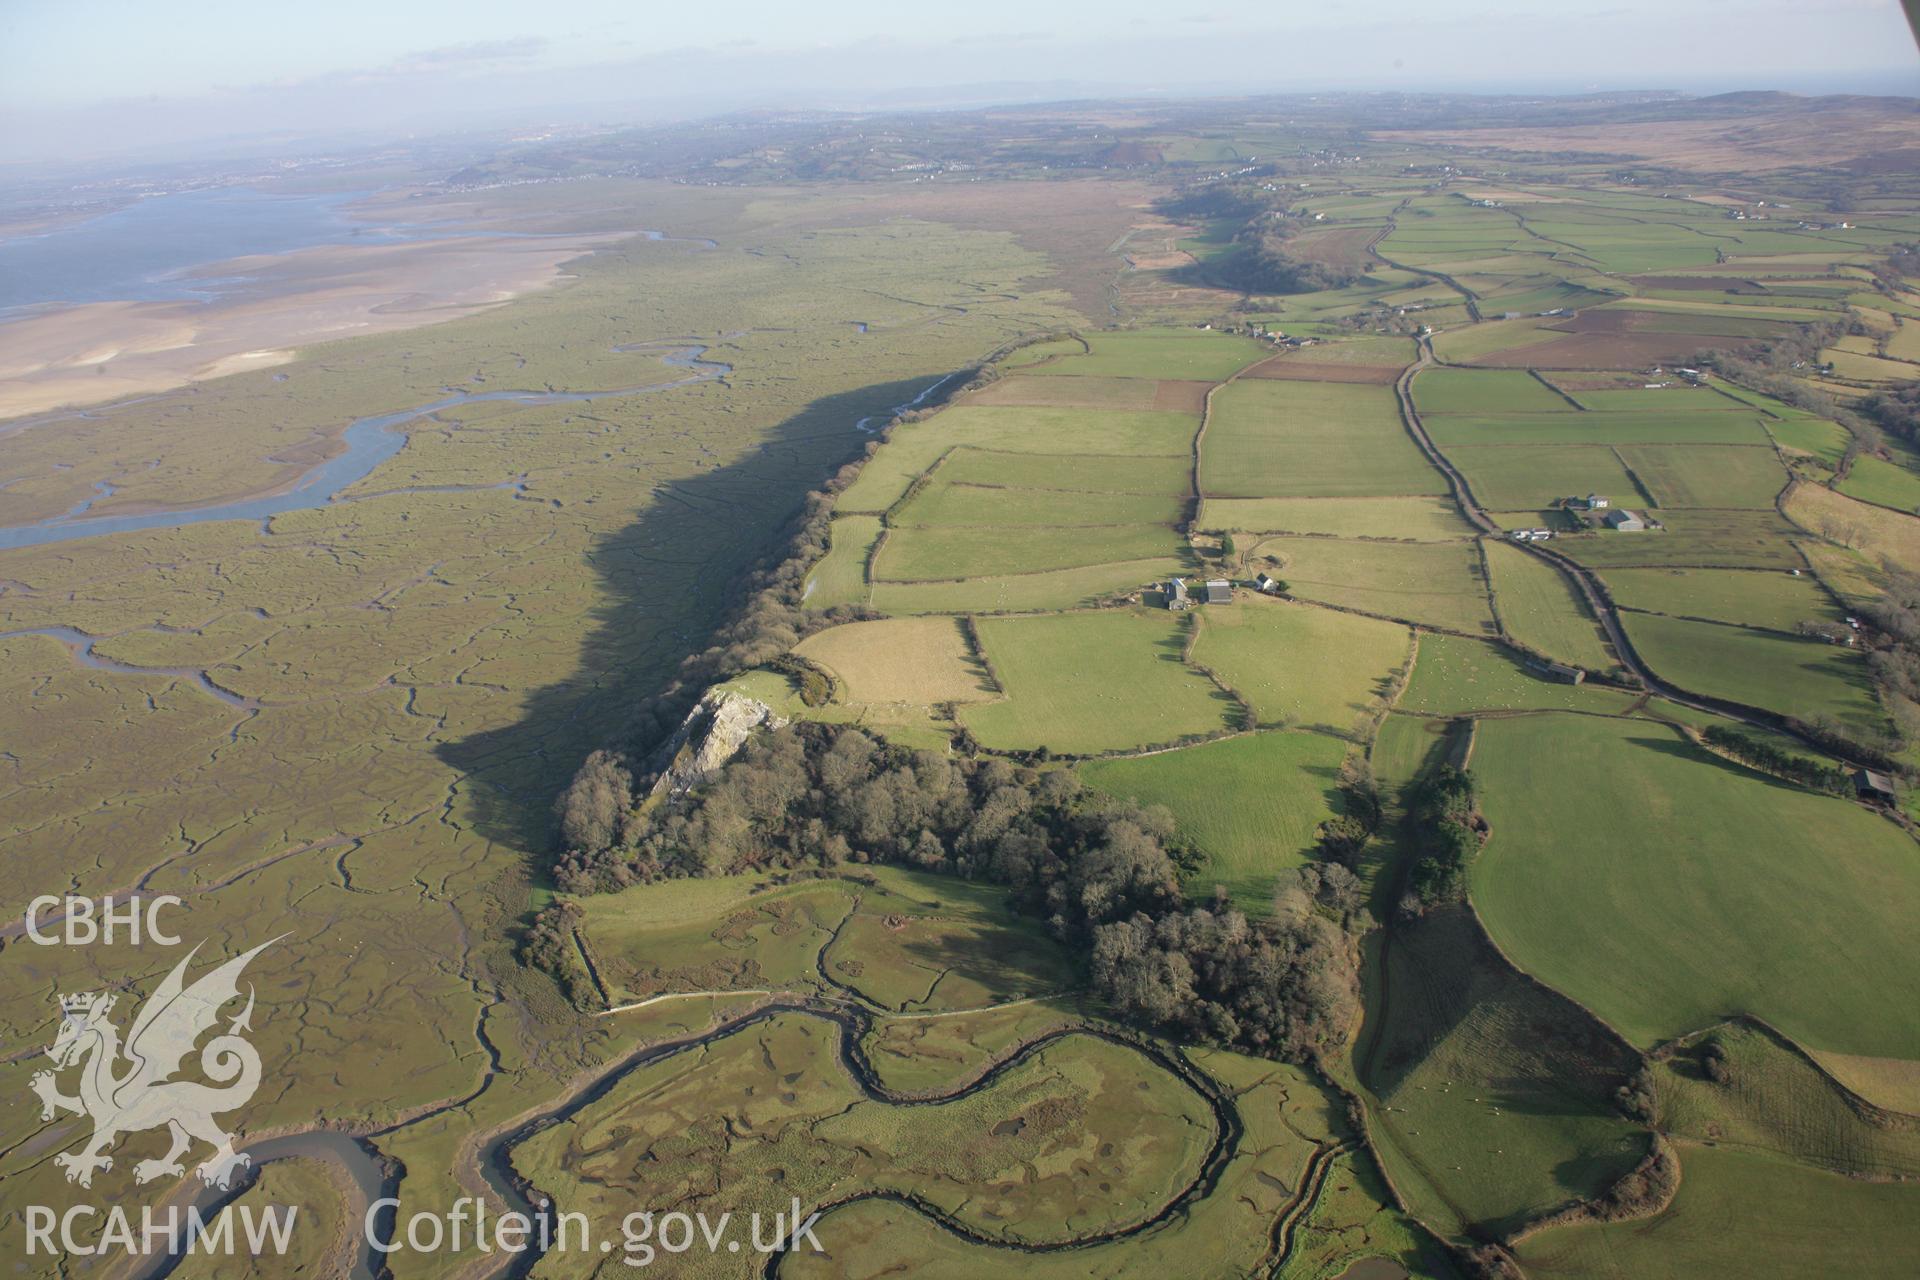 RCAHMW colour oblique aerial photograph of North Hill Tor Defended Enclosure and promontary fort in wide landscape view from the west. Taken on 26 January 2006 by Toby Driver.